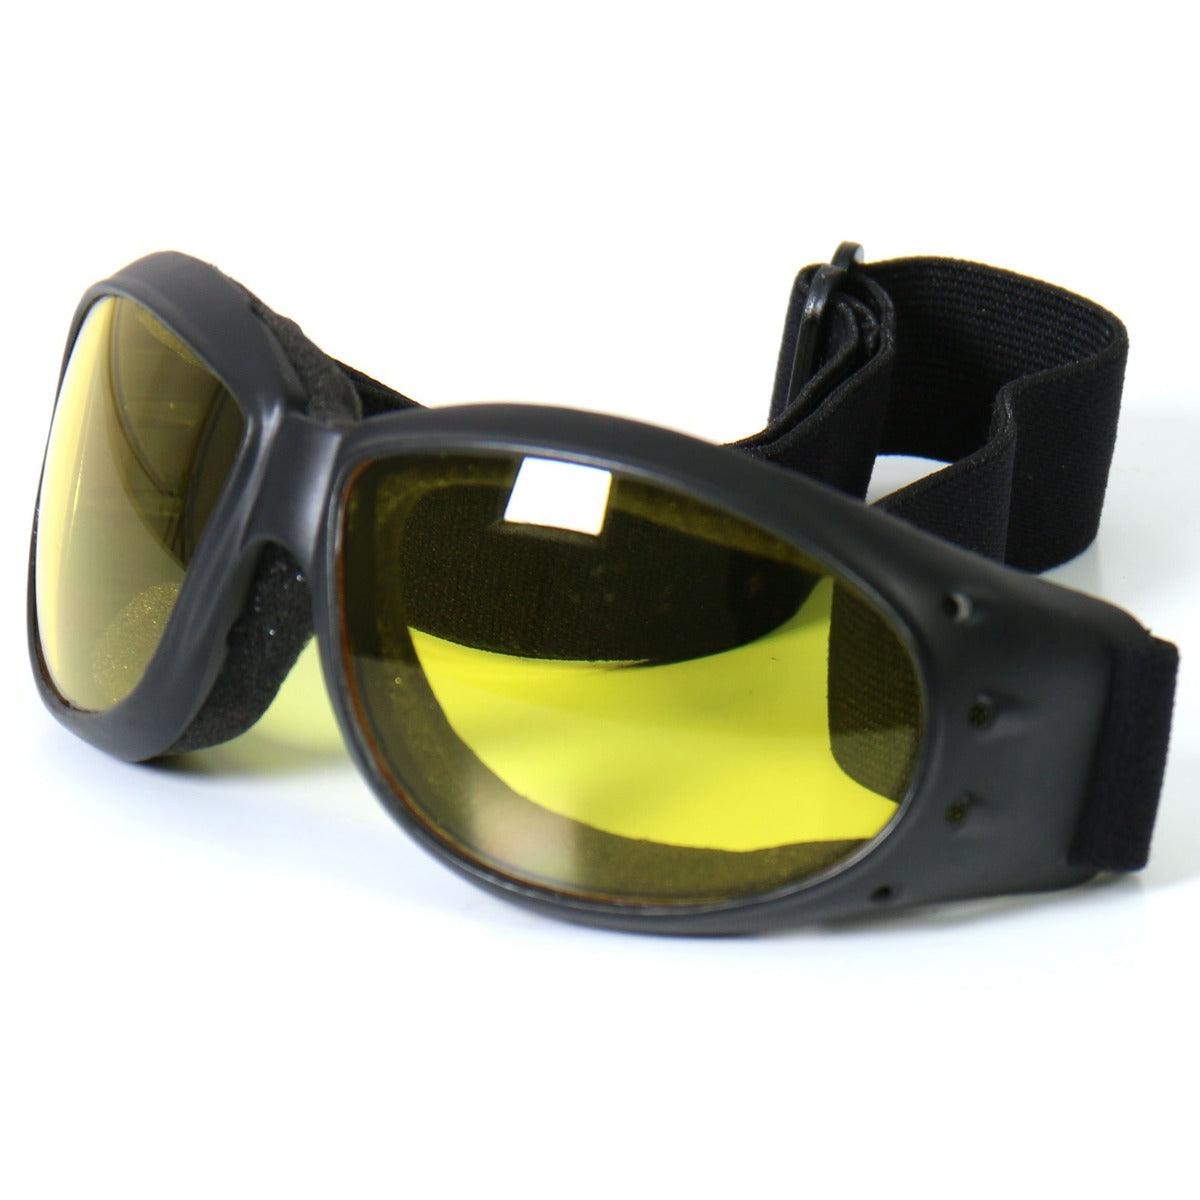 Hot Leathers Eliminator Style Motorcycle Riding Goggles With Yellow Lenses - American Legend Rider